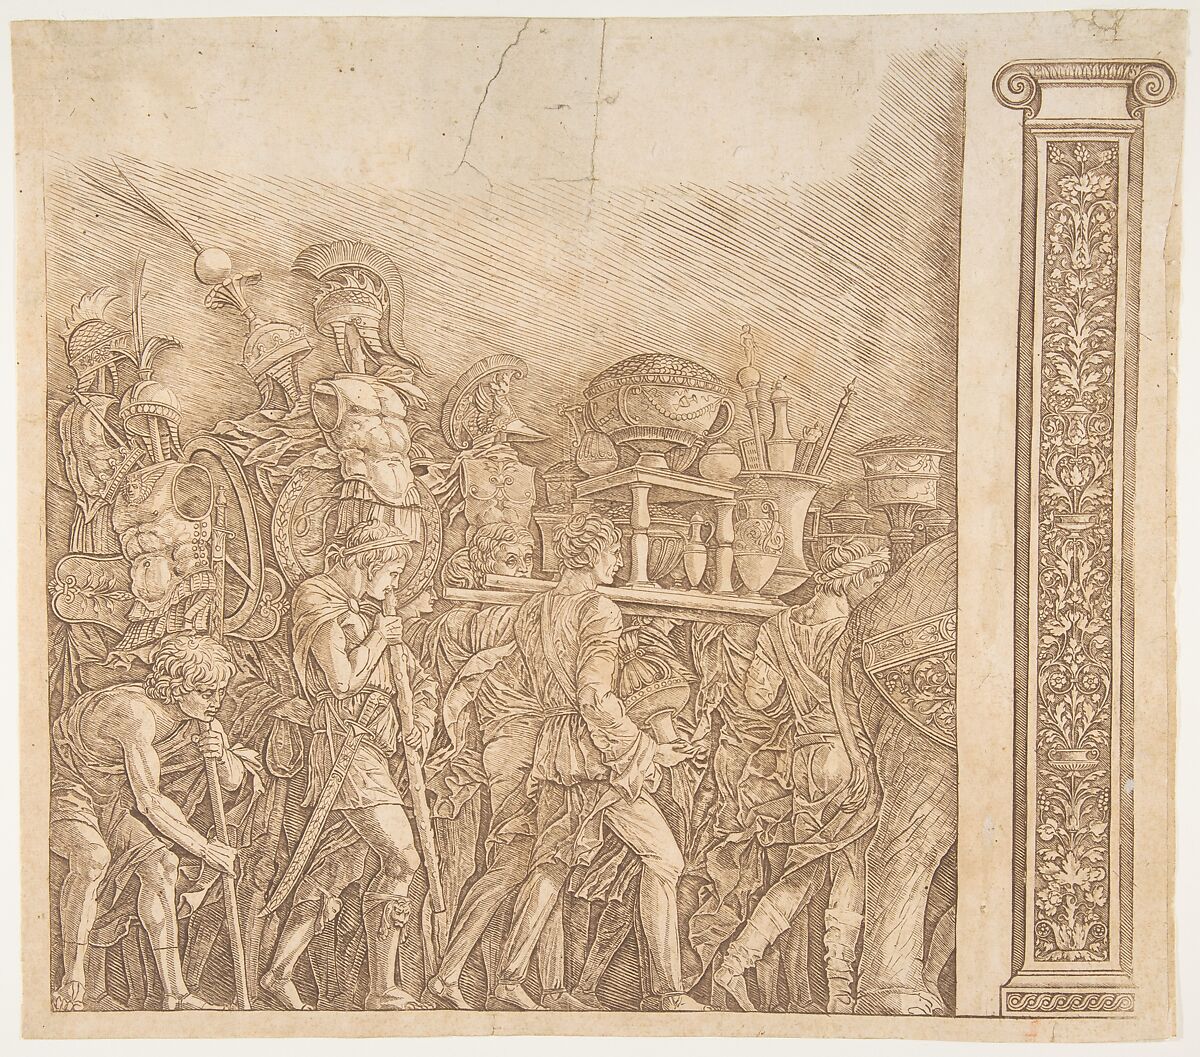 Triumph of Caesar: soldiers carrying trophies (pilaster at right), Gian Marco Cavalli (Italian, ca. 1454–after 1508, activity documented 1475–1508), Engraving, printed in brown 